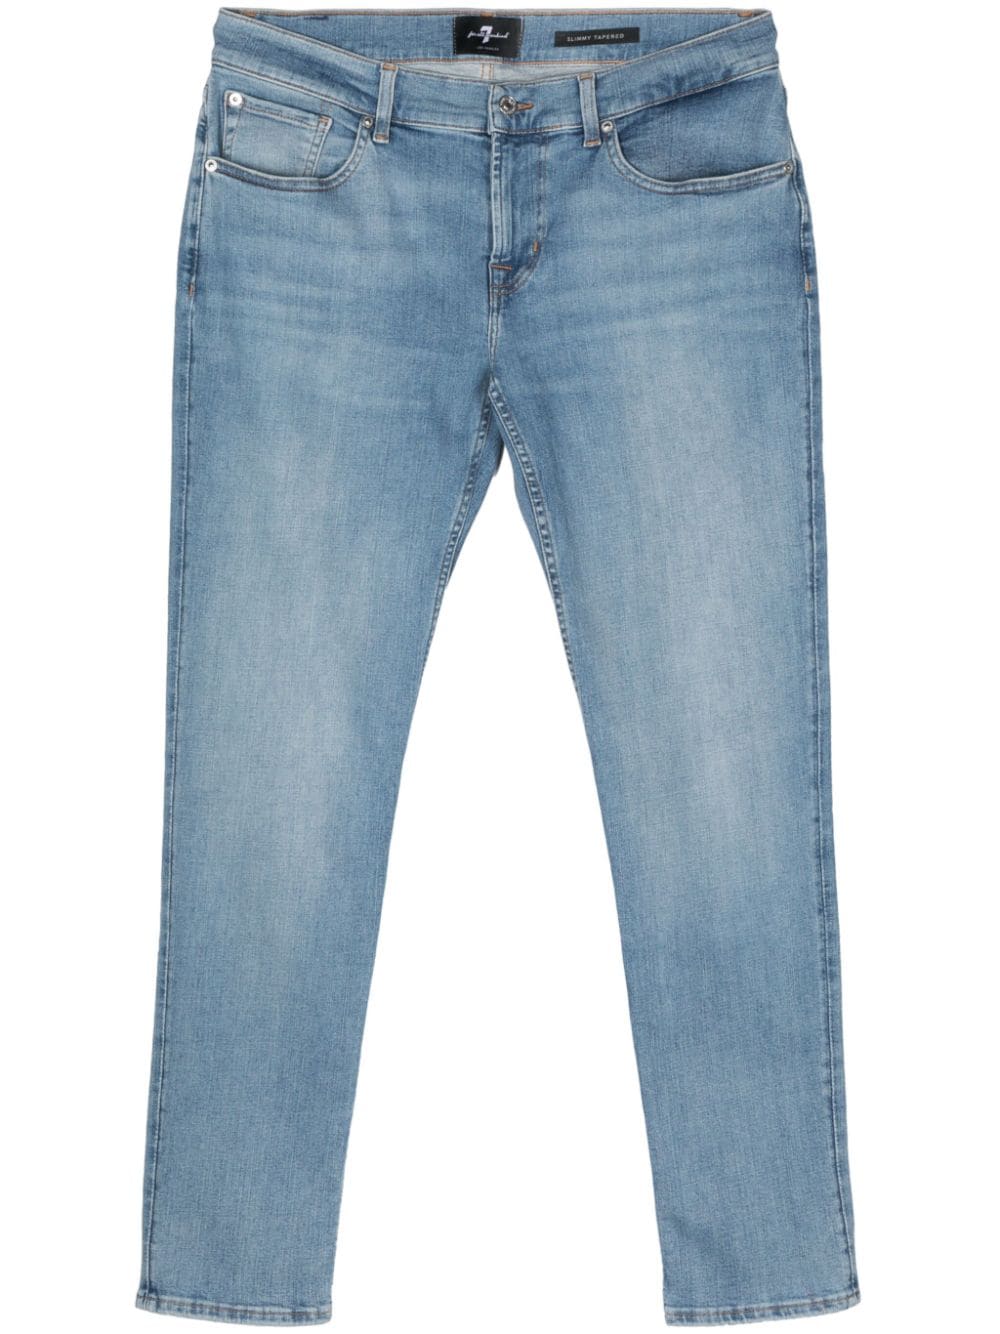 7 For All Mankind mid-rise slim-fit jeans - Blue von 7 For All Mankind